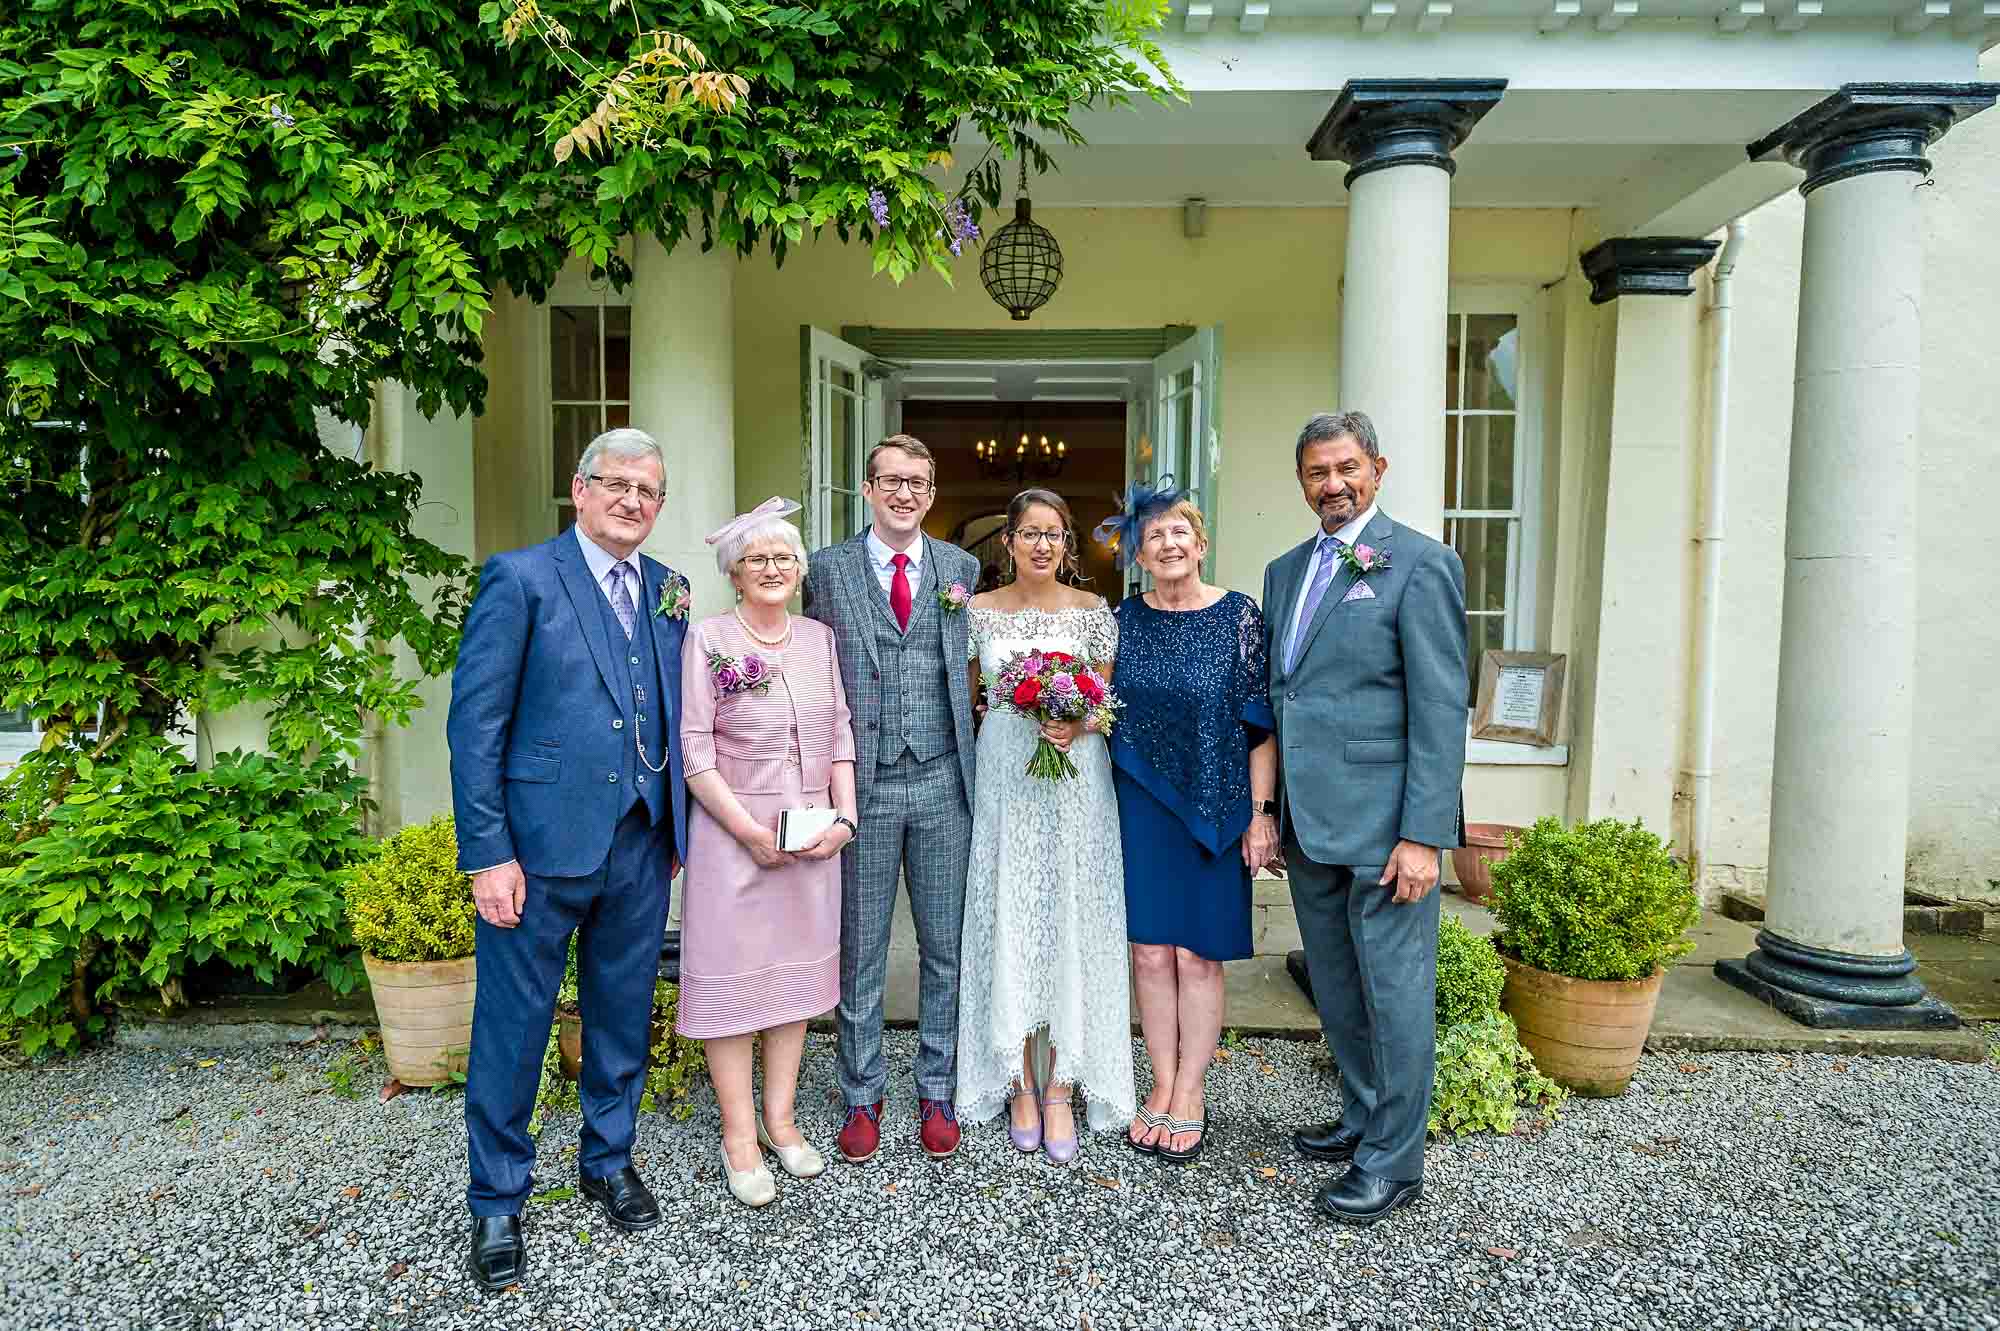 Newly-weds with parents outside Plas Glansevin, Carmarthenshire